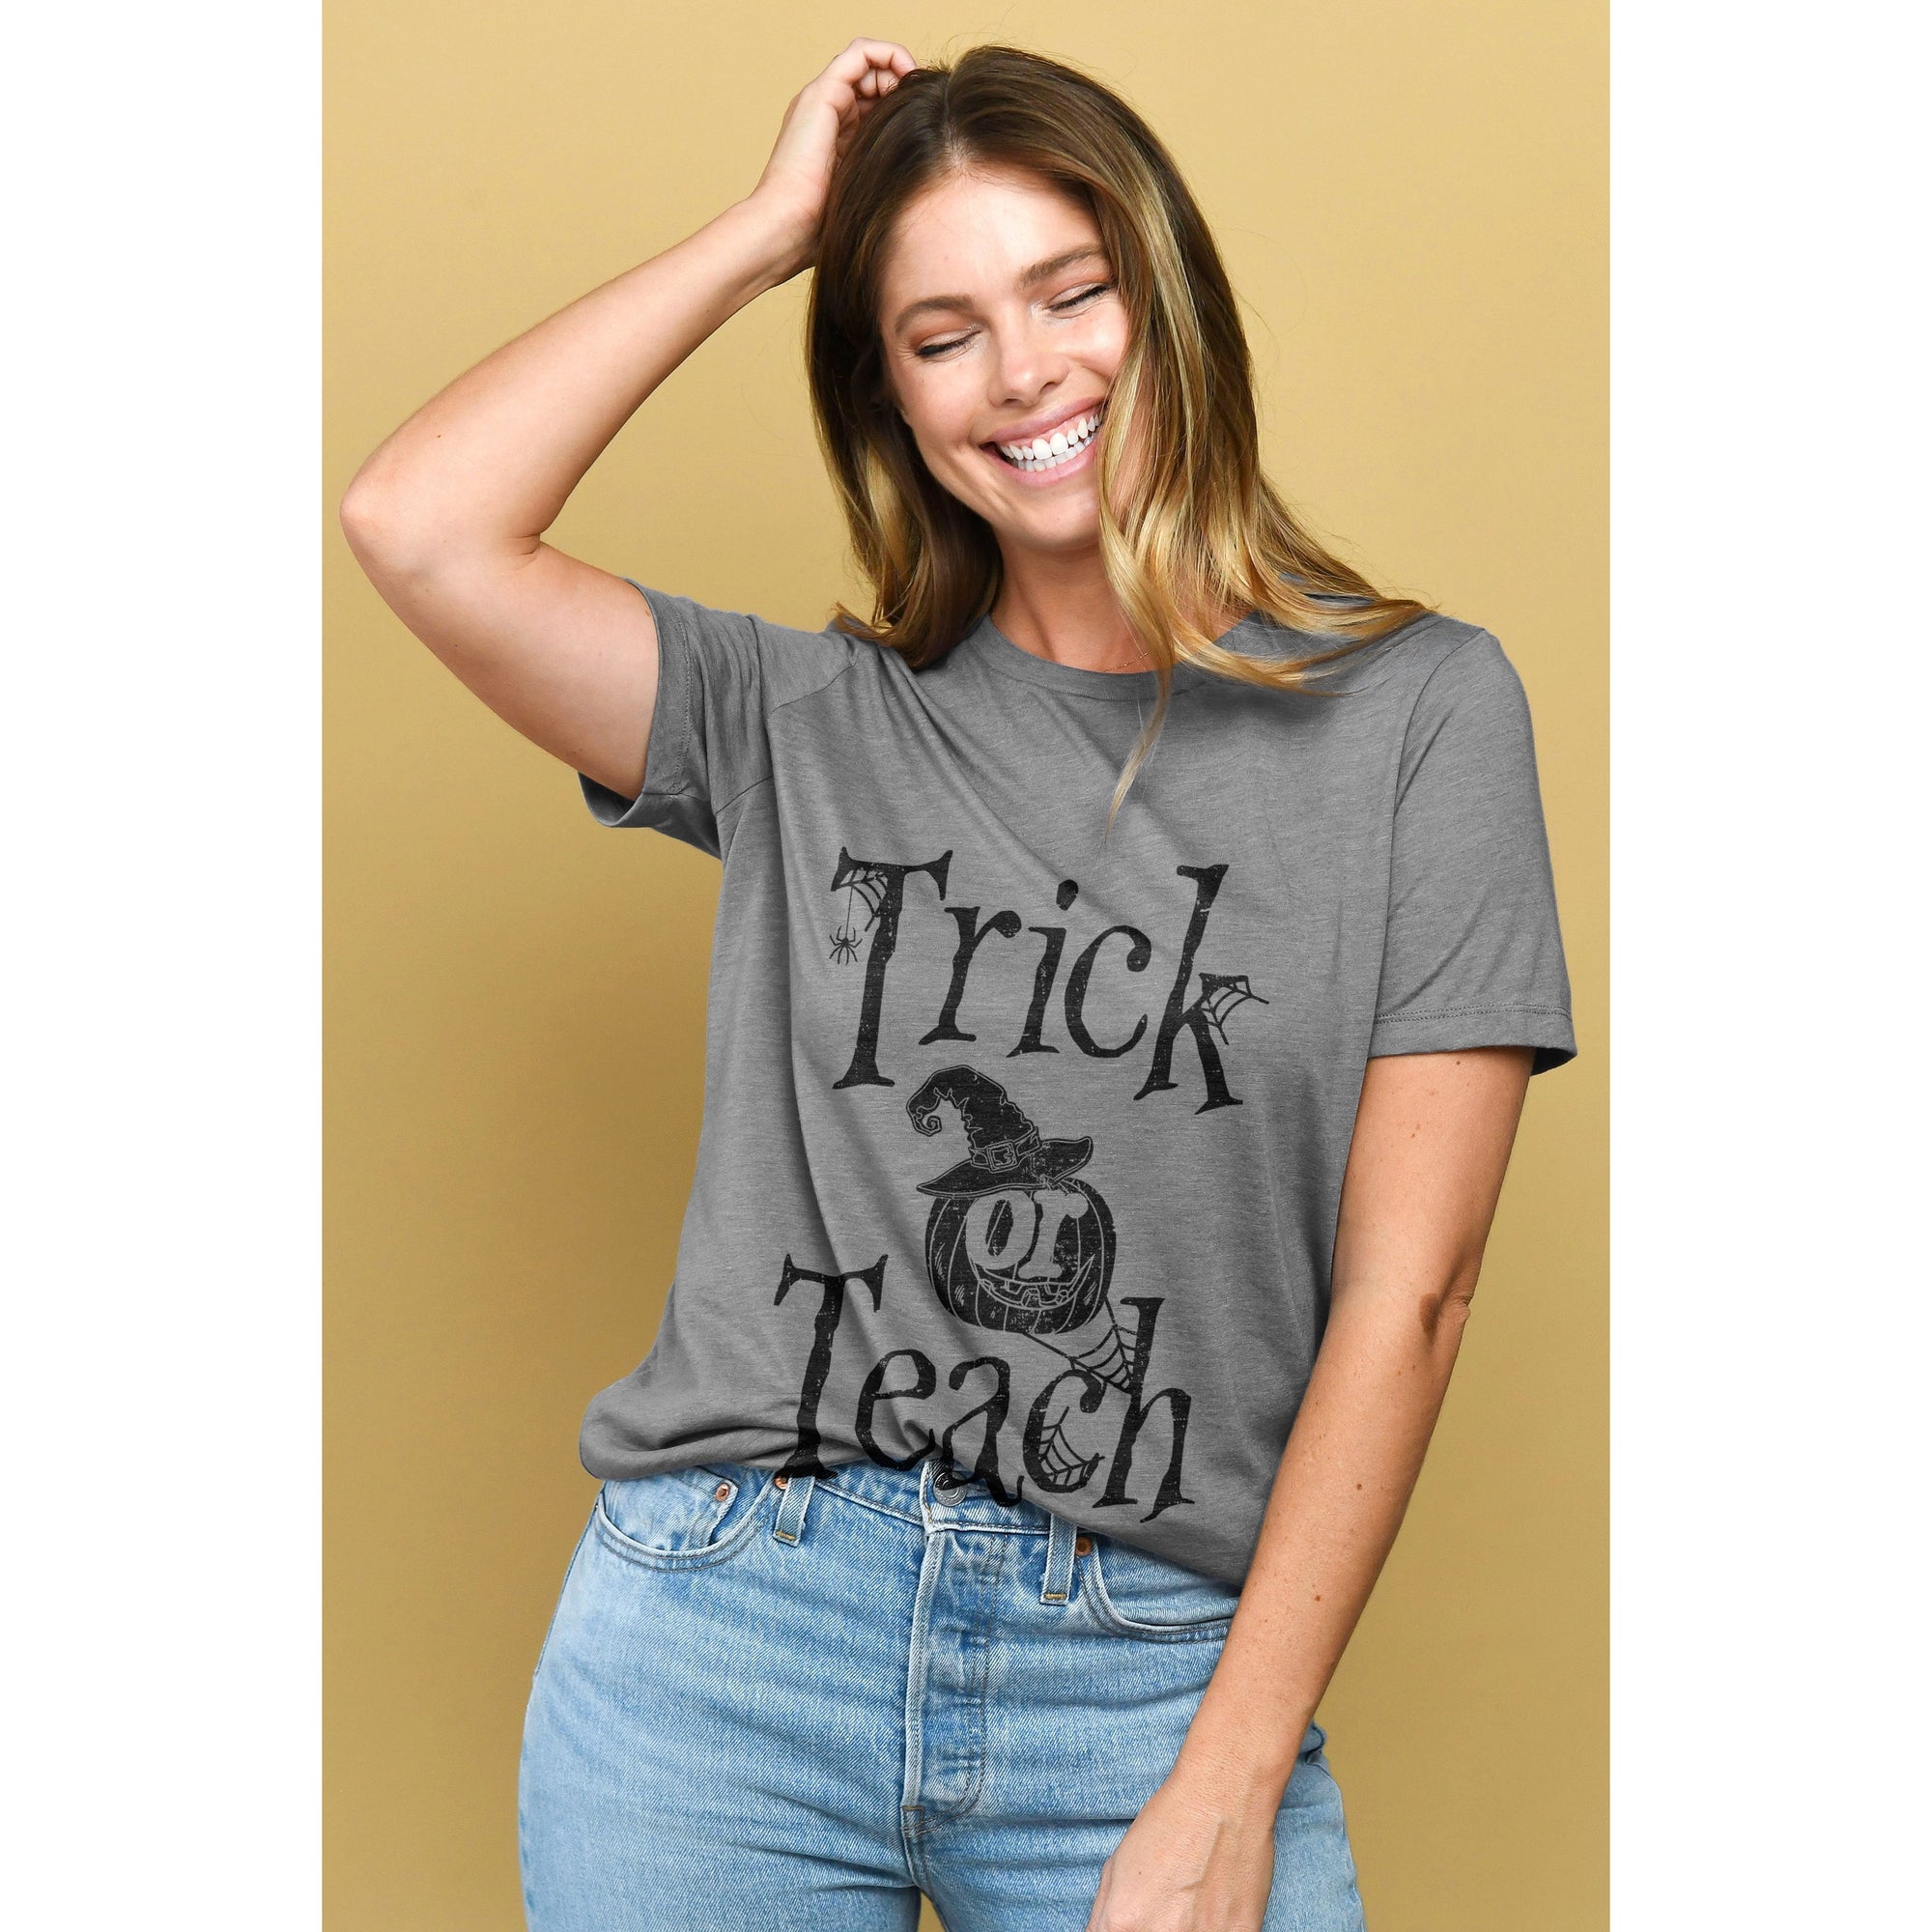 Trick Or Teach - thread tank | Stories you can wear.